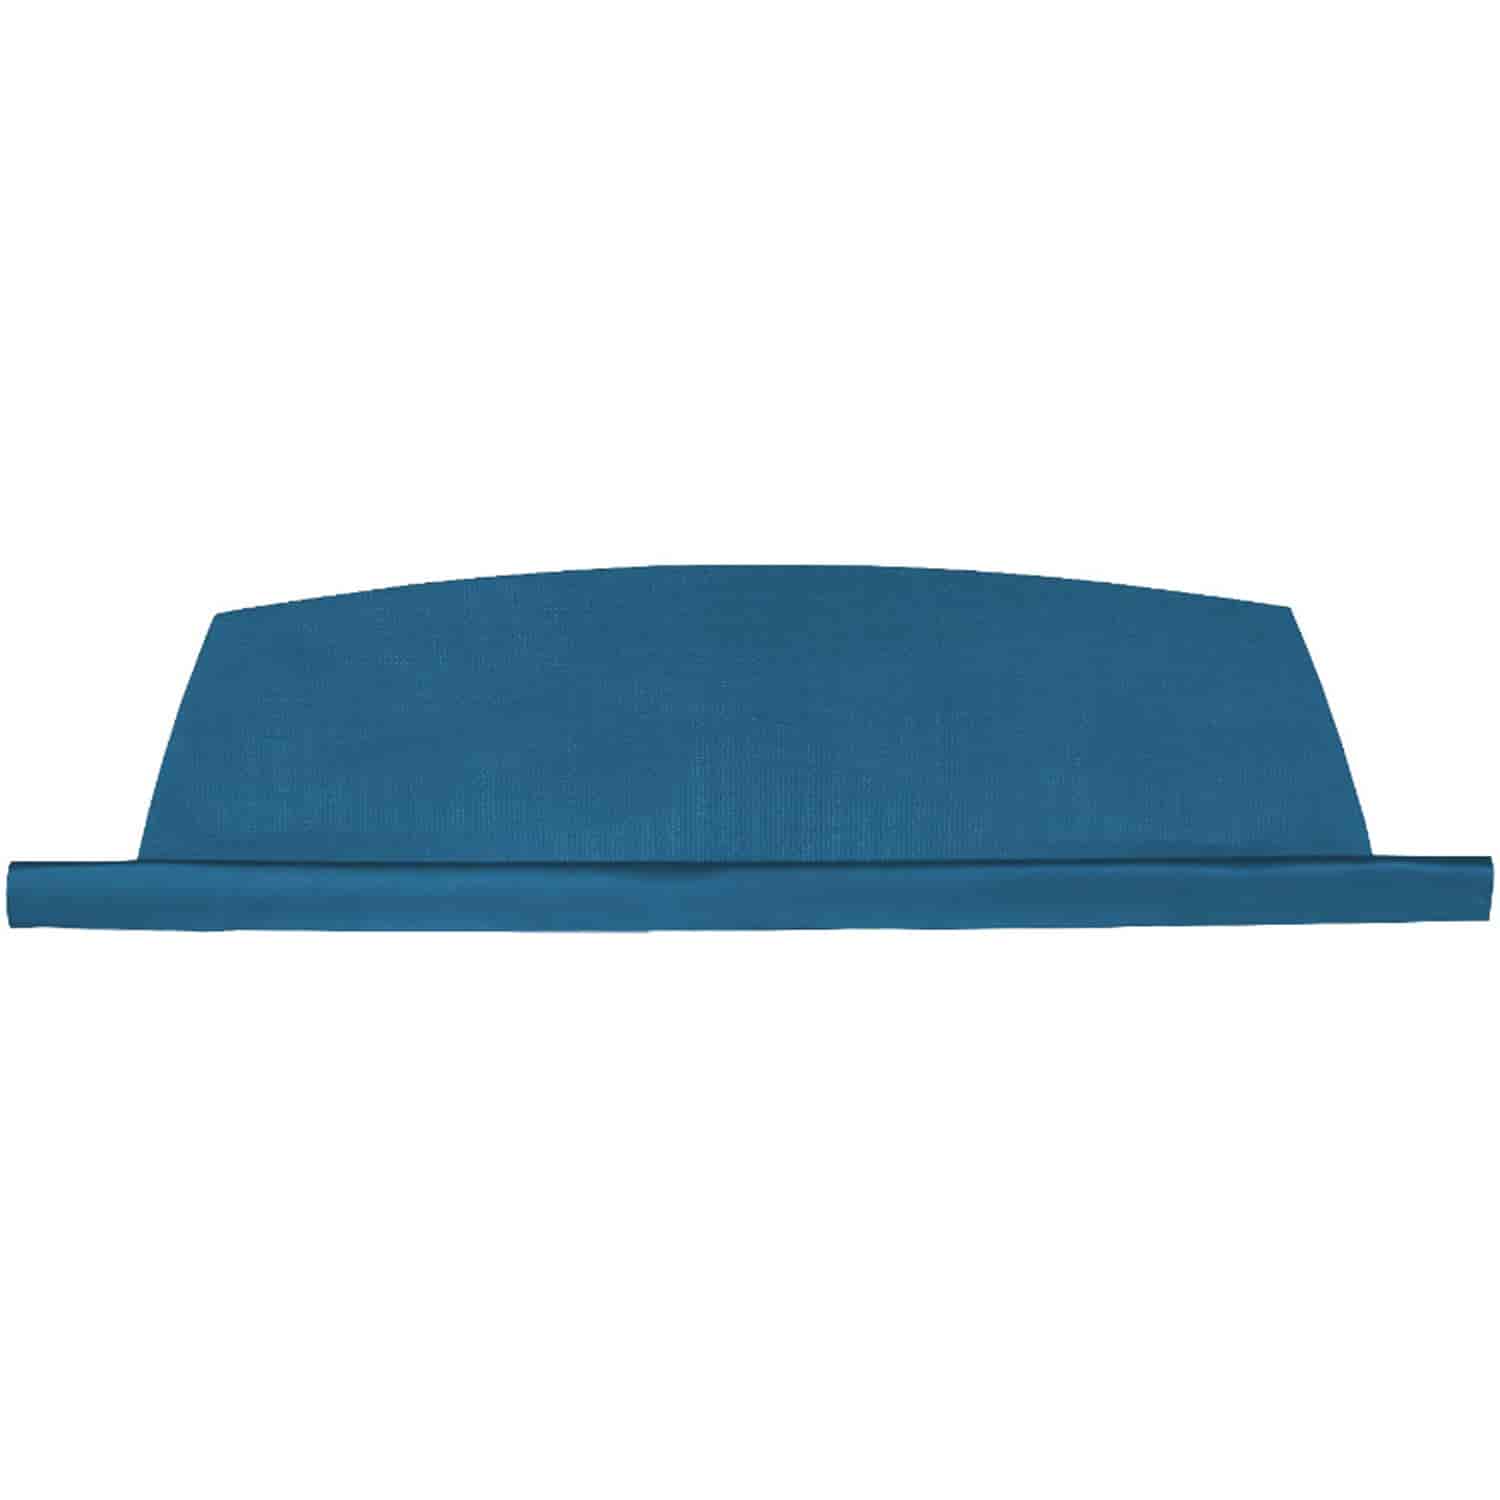 PT67GC338GN 67 CAMARO PACKAGE TRAY STANDARD - BRIGHT BLUE